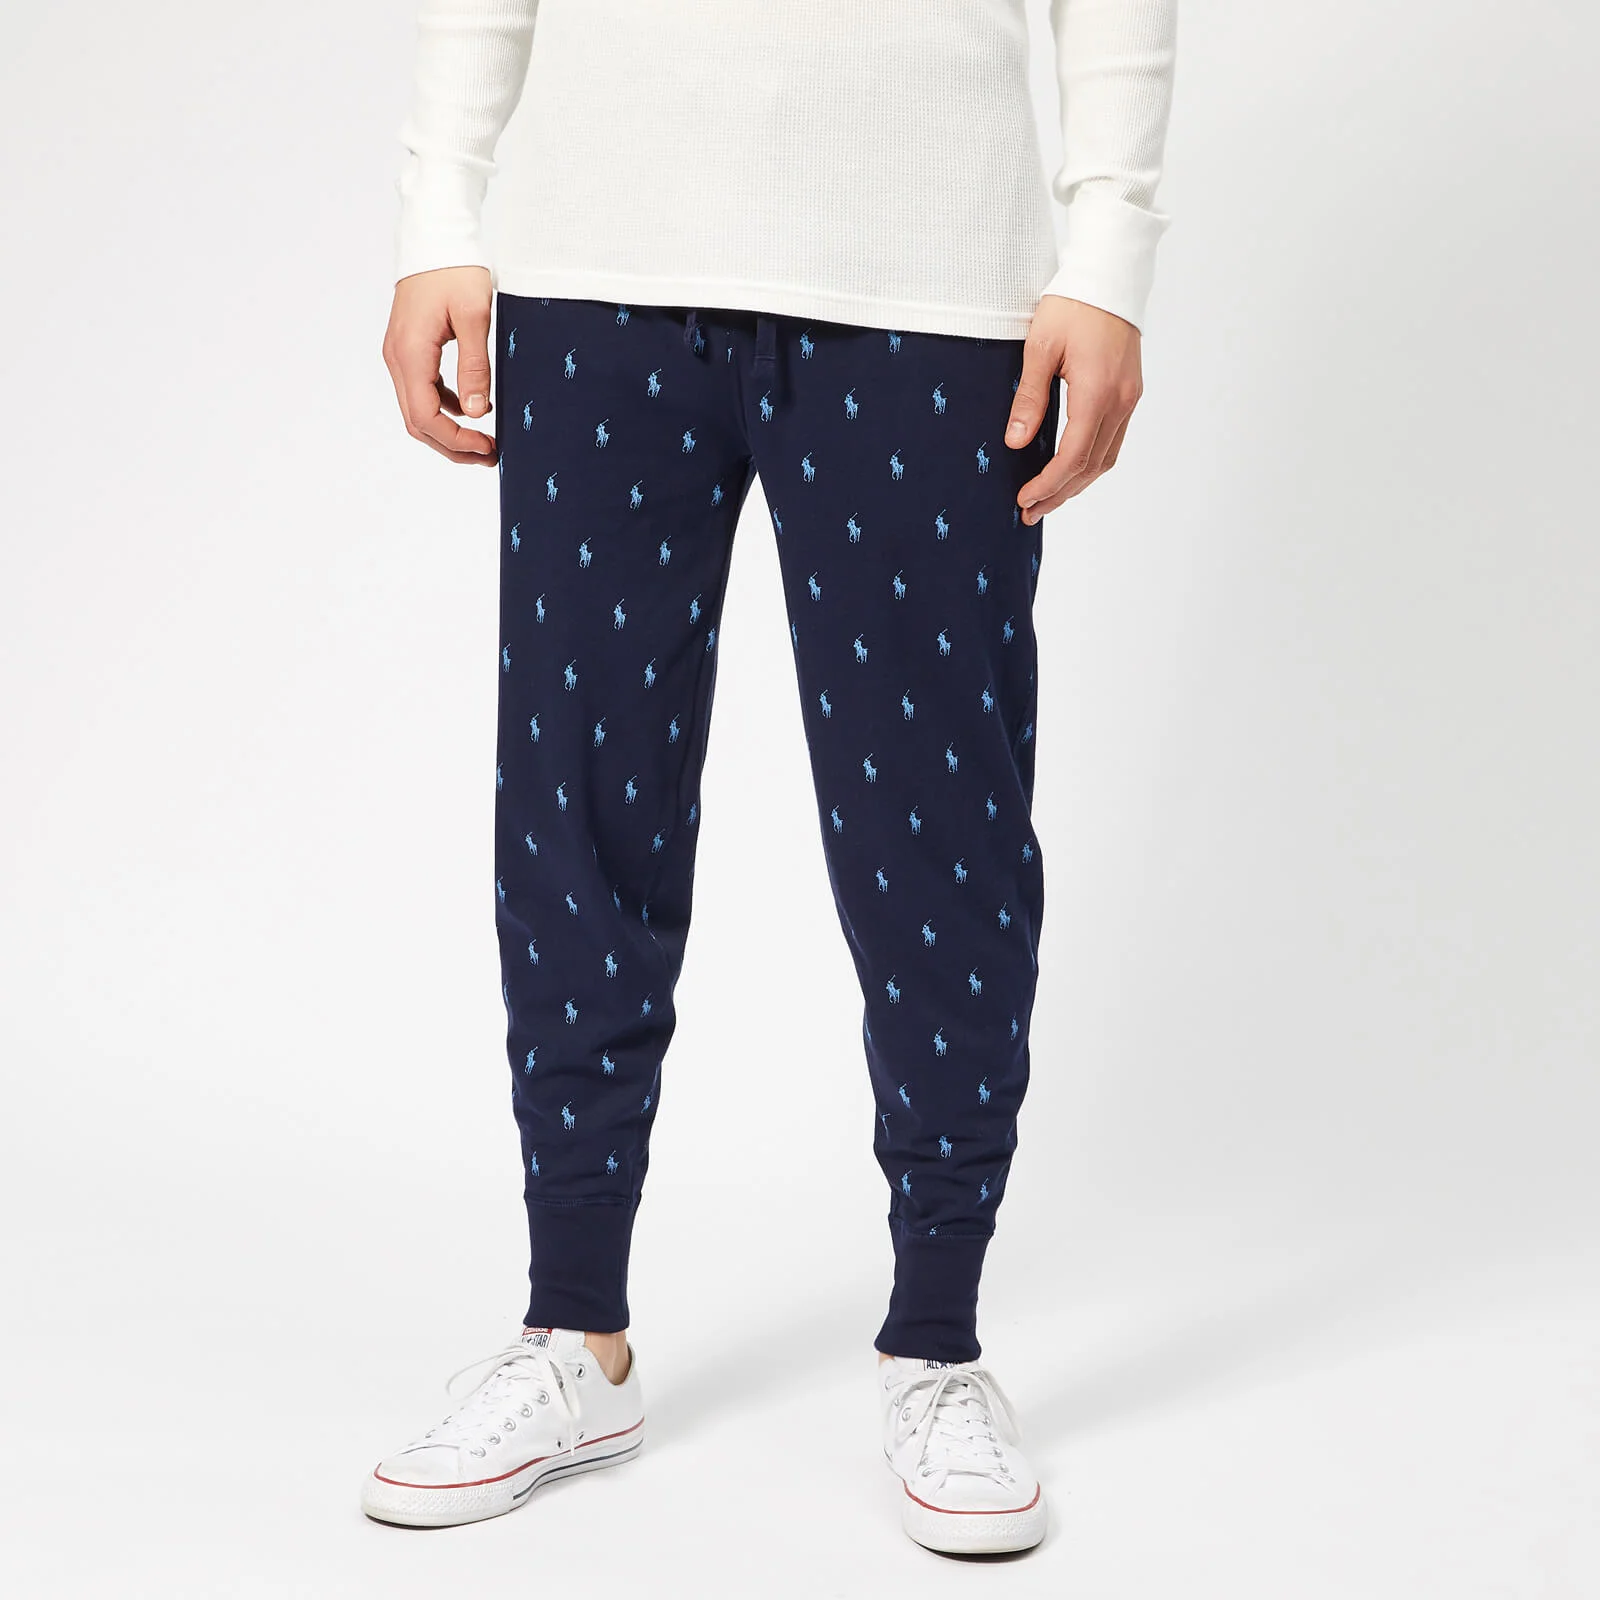 Polo Ralph Lauren Men's All Over Pony Joggers - Cruise Navy Image 1